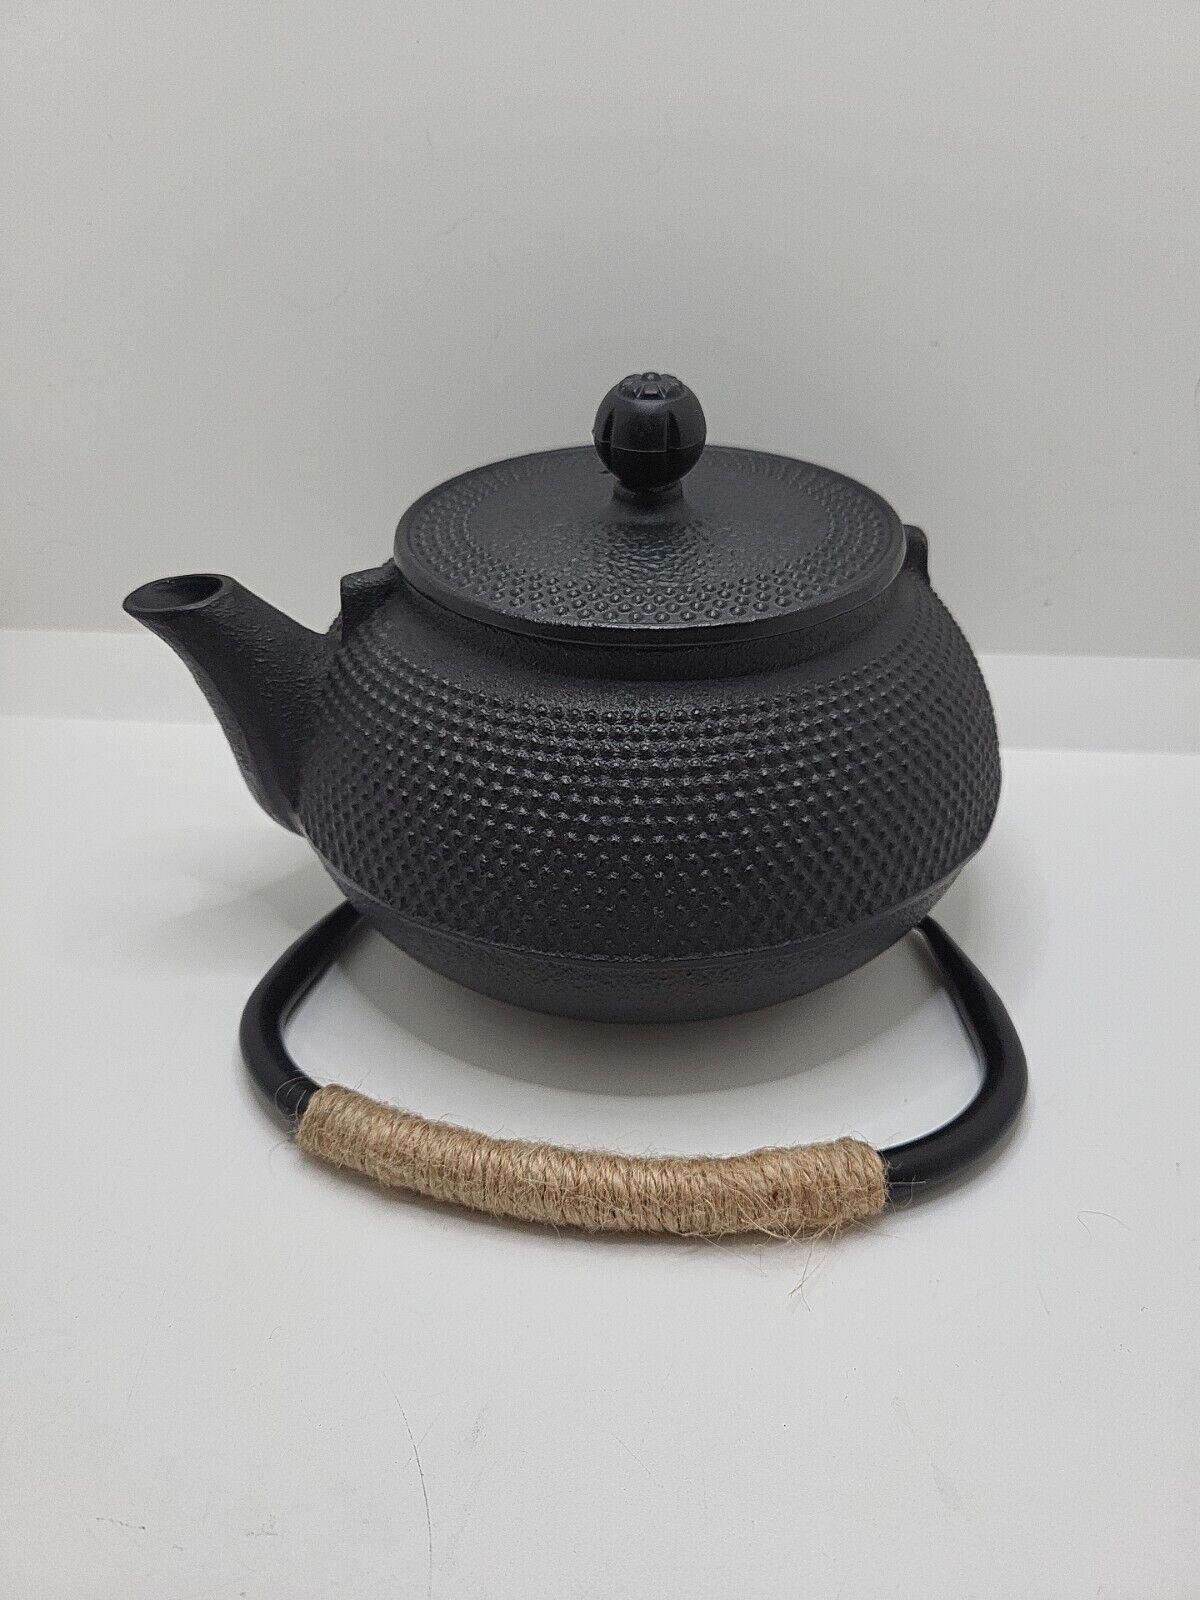 Cast Iron Hobnail Black Kettle Teapot Made in Japan